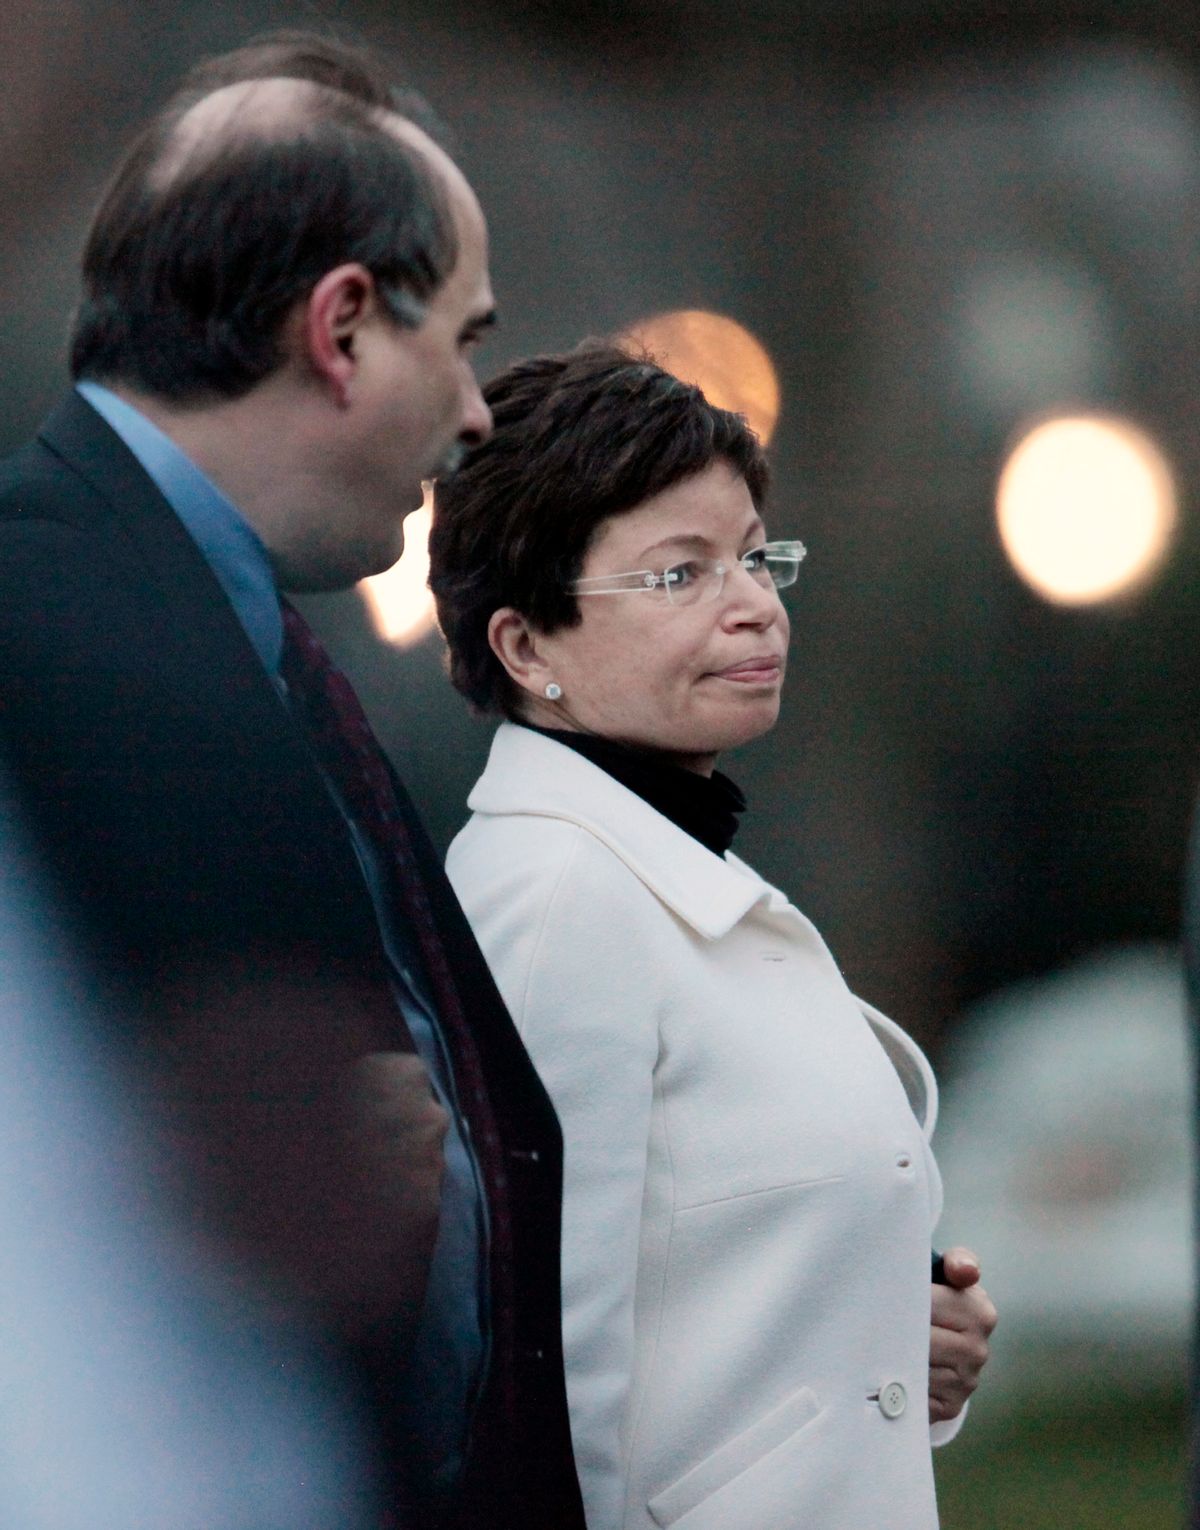 Senior advisers Valerie Jarrett and David Axelrod walk together on the South Lawn as President Barack Obama returns to the White House in Washington, Friday, Dec. 4, 2009, after he returned from a trip to Allentown, Pa., where he spoke about jobs. (AP Photo/Charles Dharapak) (Associated Press)